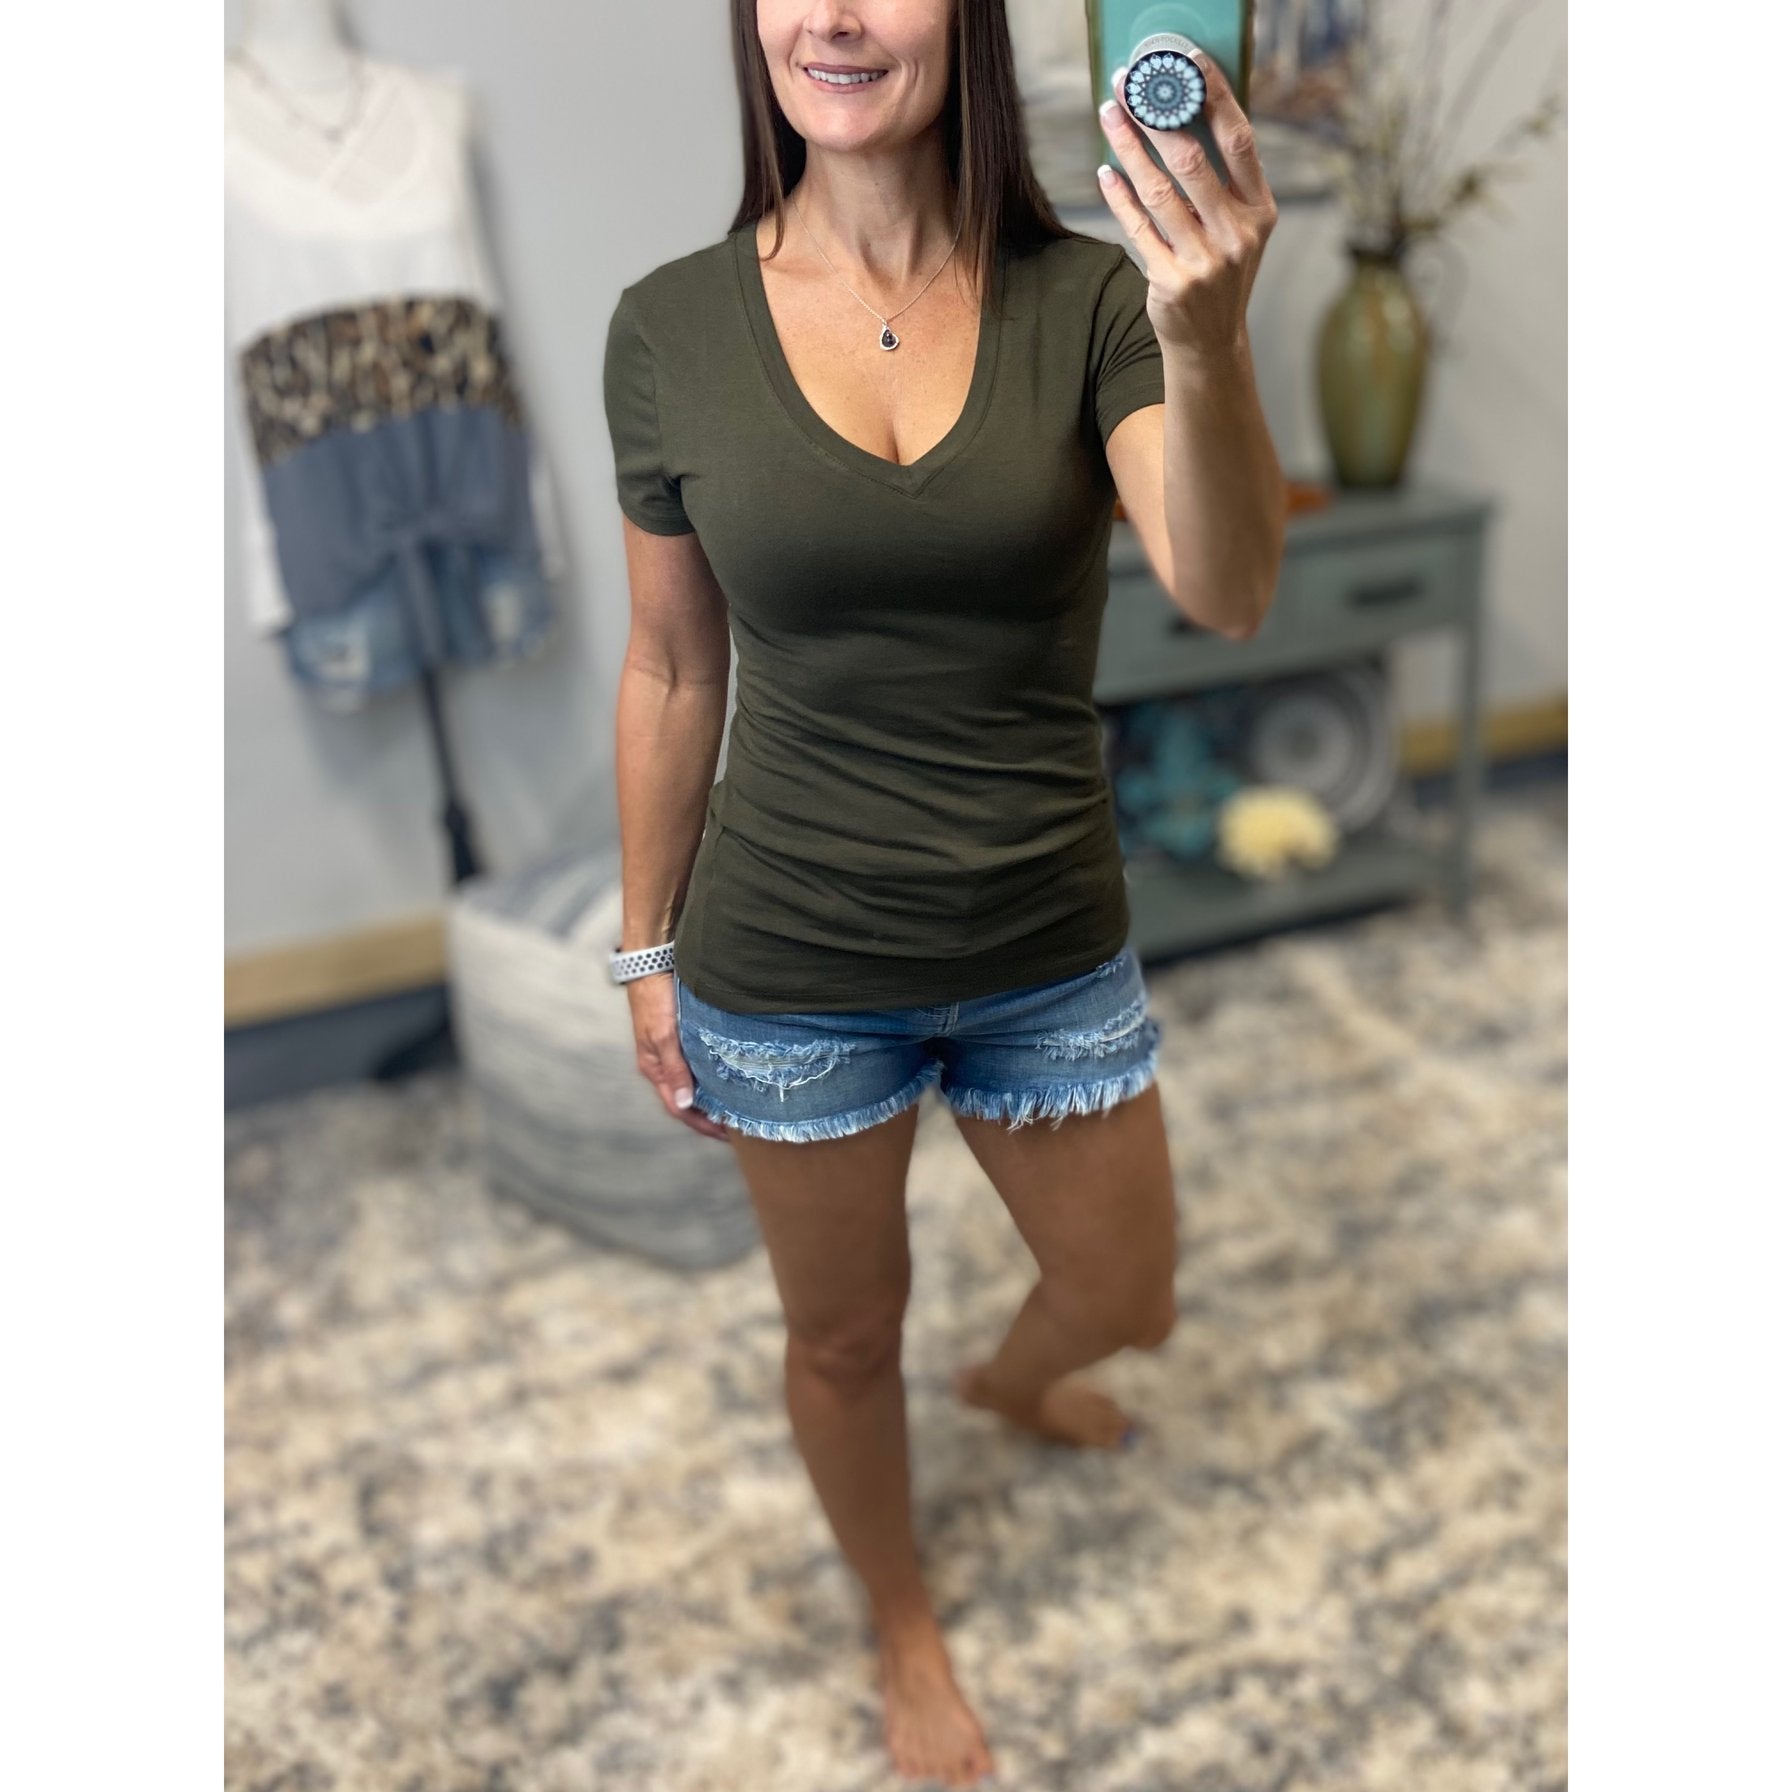 “Basic Babe” Low Cut V-Neck Cleavage Baby Slimming Basic Tee Shirt Top Dk Olive